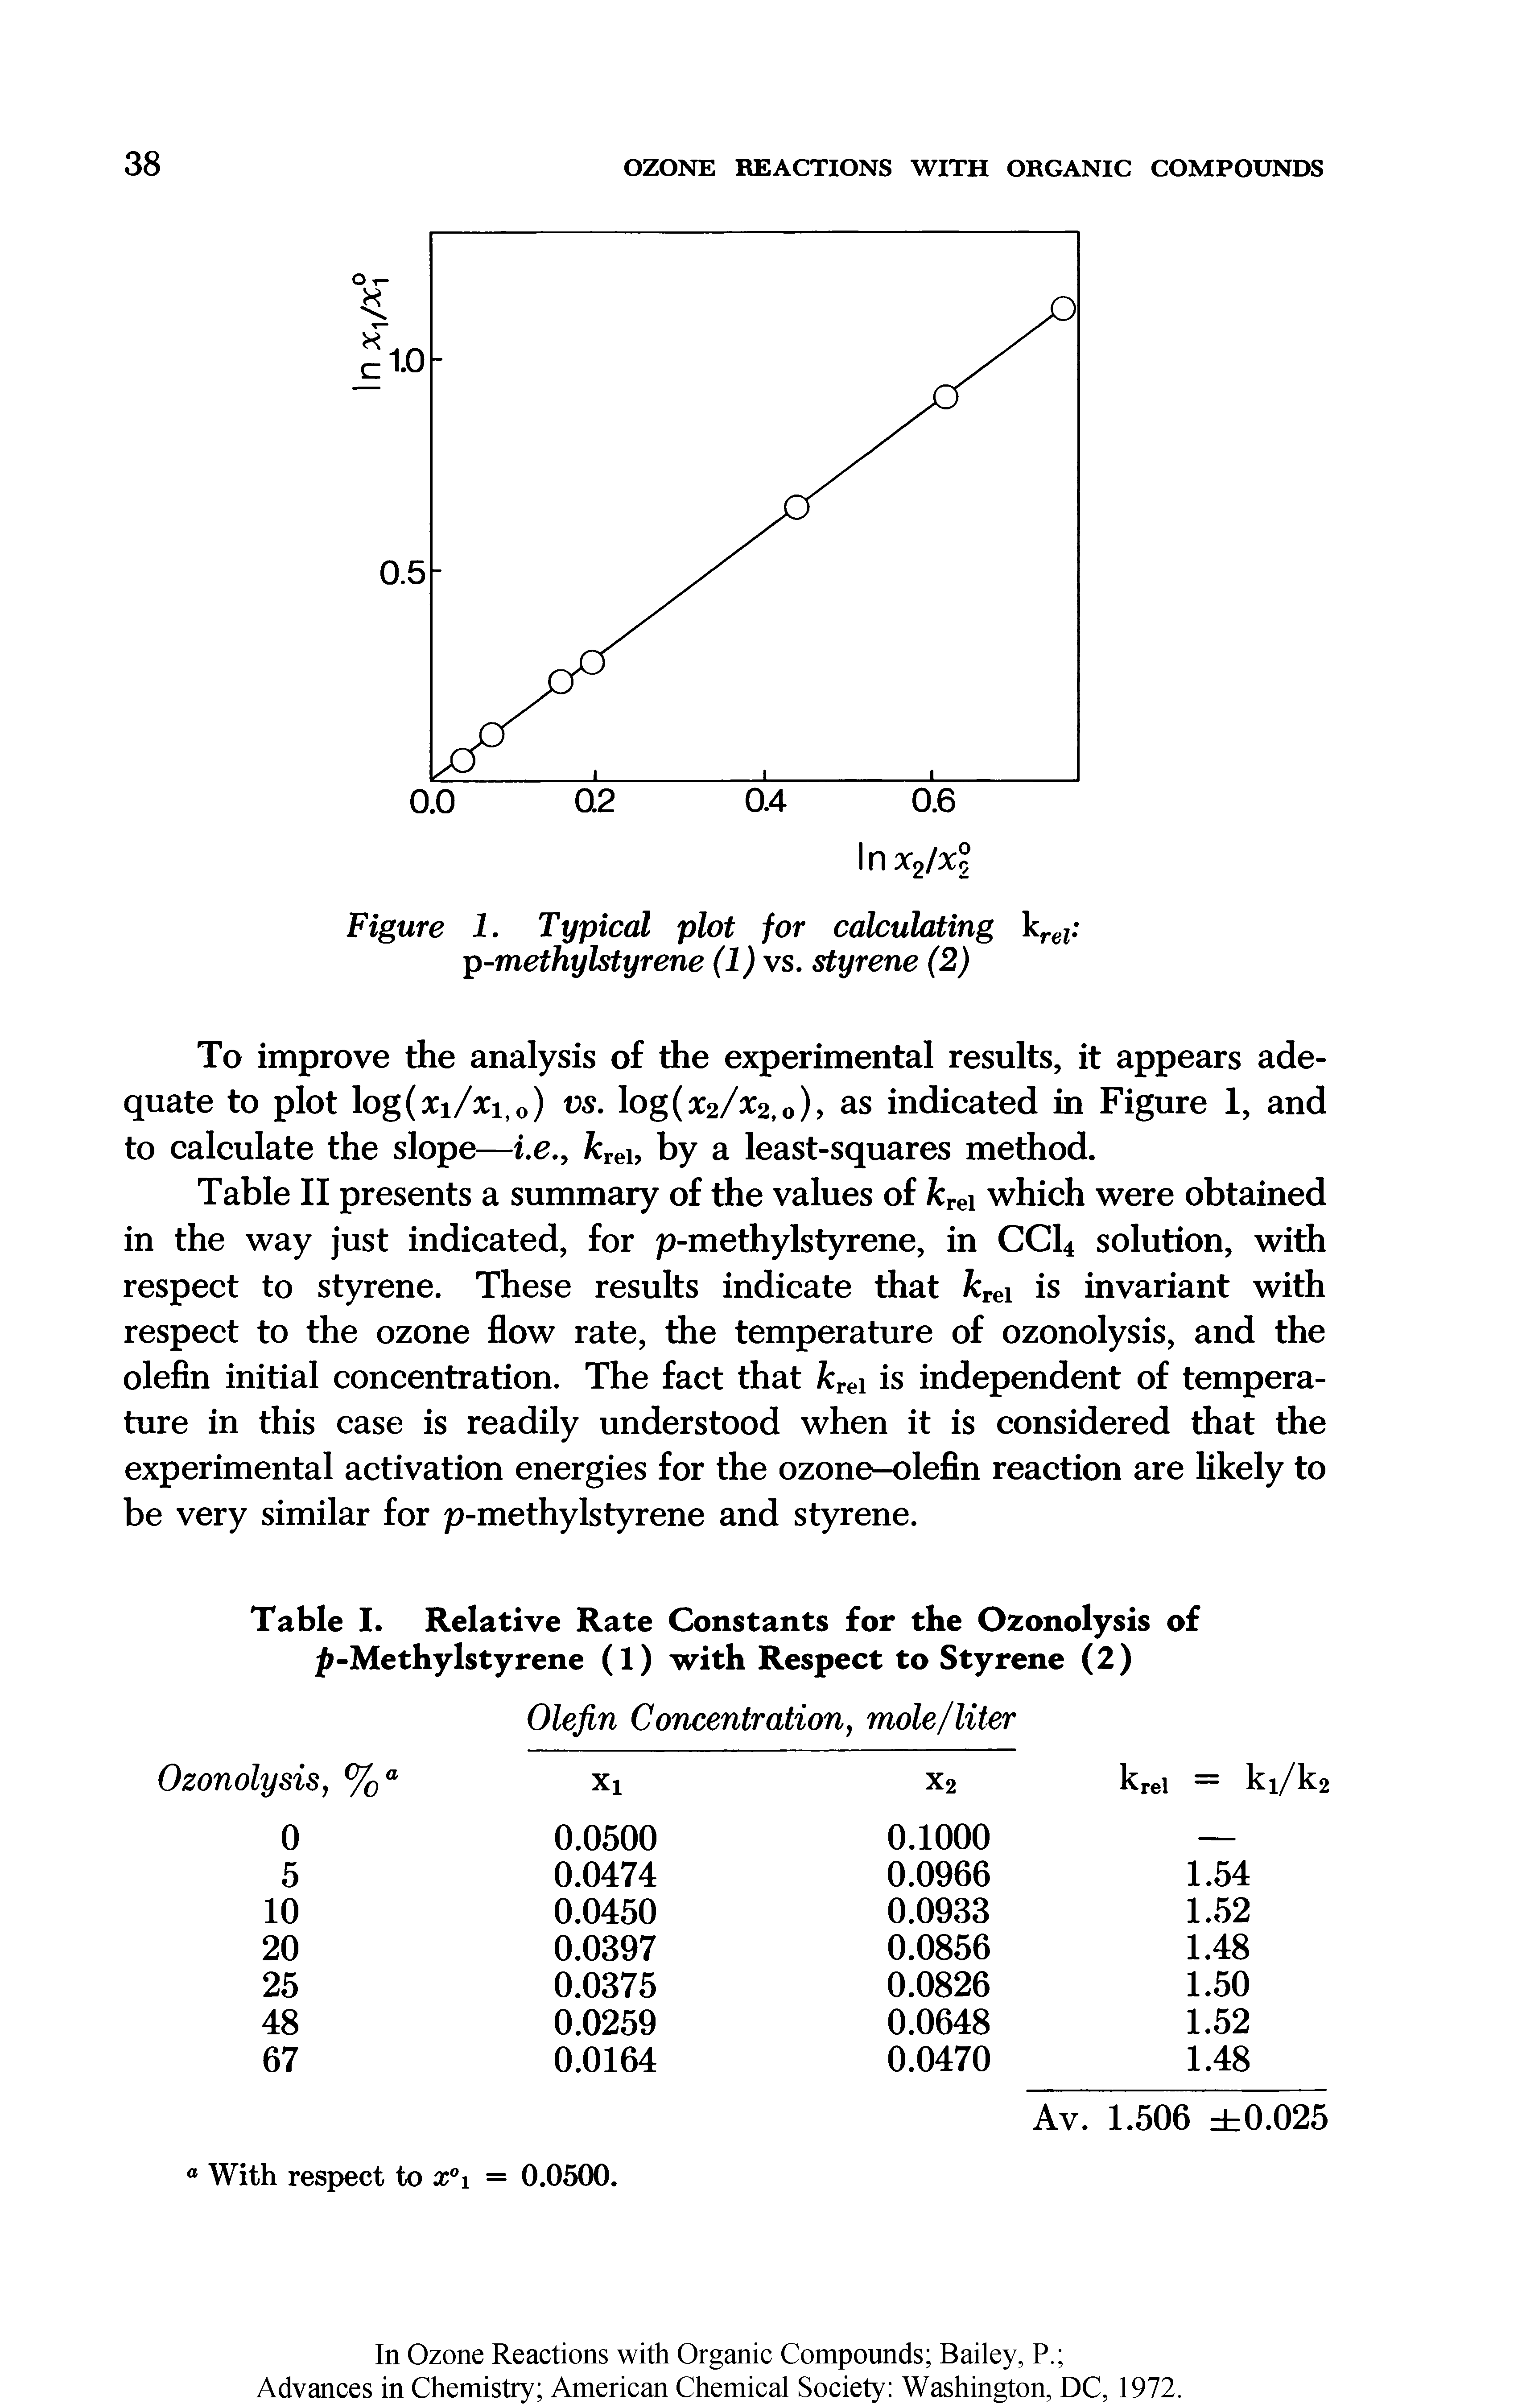 Table II presents a summary of the values of kreY which were obtained in the way just indicated, for p-methylstyrene, in CC14 solution, with respect to styrene. These results indicate that kTei is invariant with respect to the ozone flow rate, the temperature of ozonolysis, and the olefin initial concentration. The fact that kreA is independent of temperature in this case is readily understood when it is considered that the experimental activation energies for the ozone-olefin reaction are likely to be very similar for p-methylstyrene and styrene.